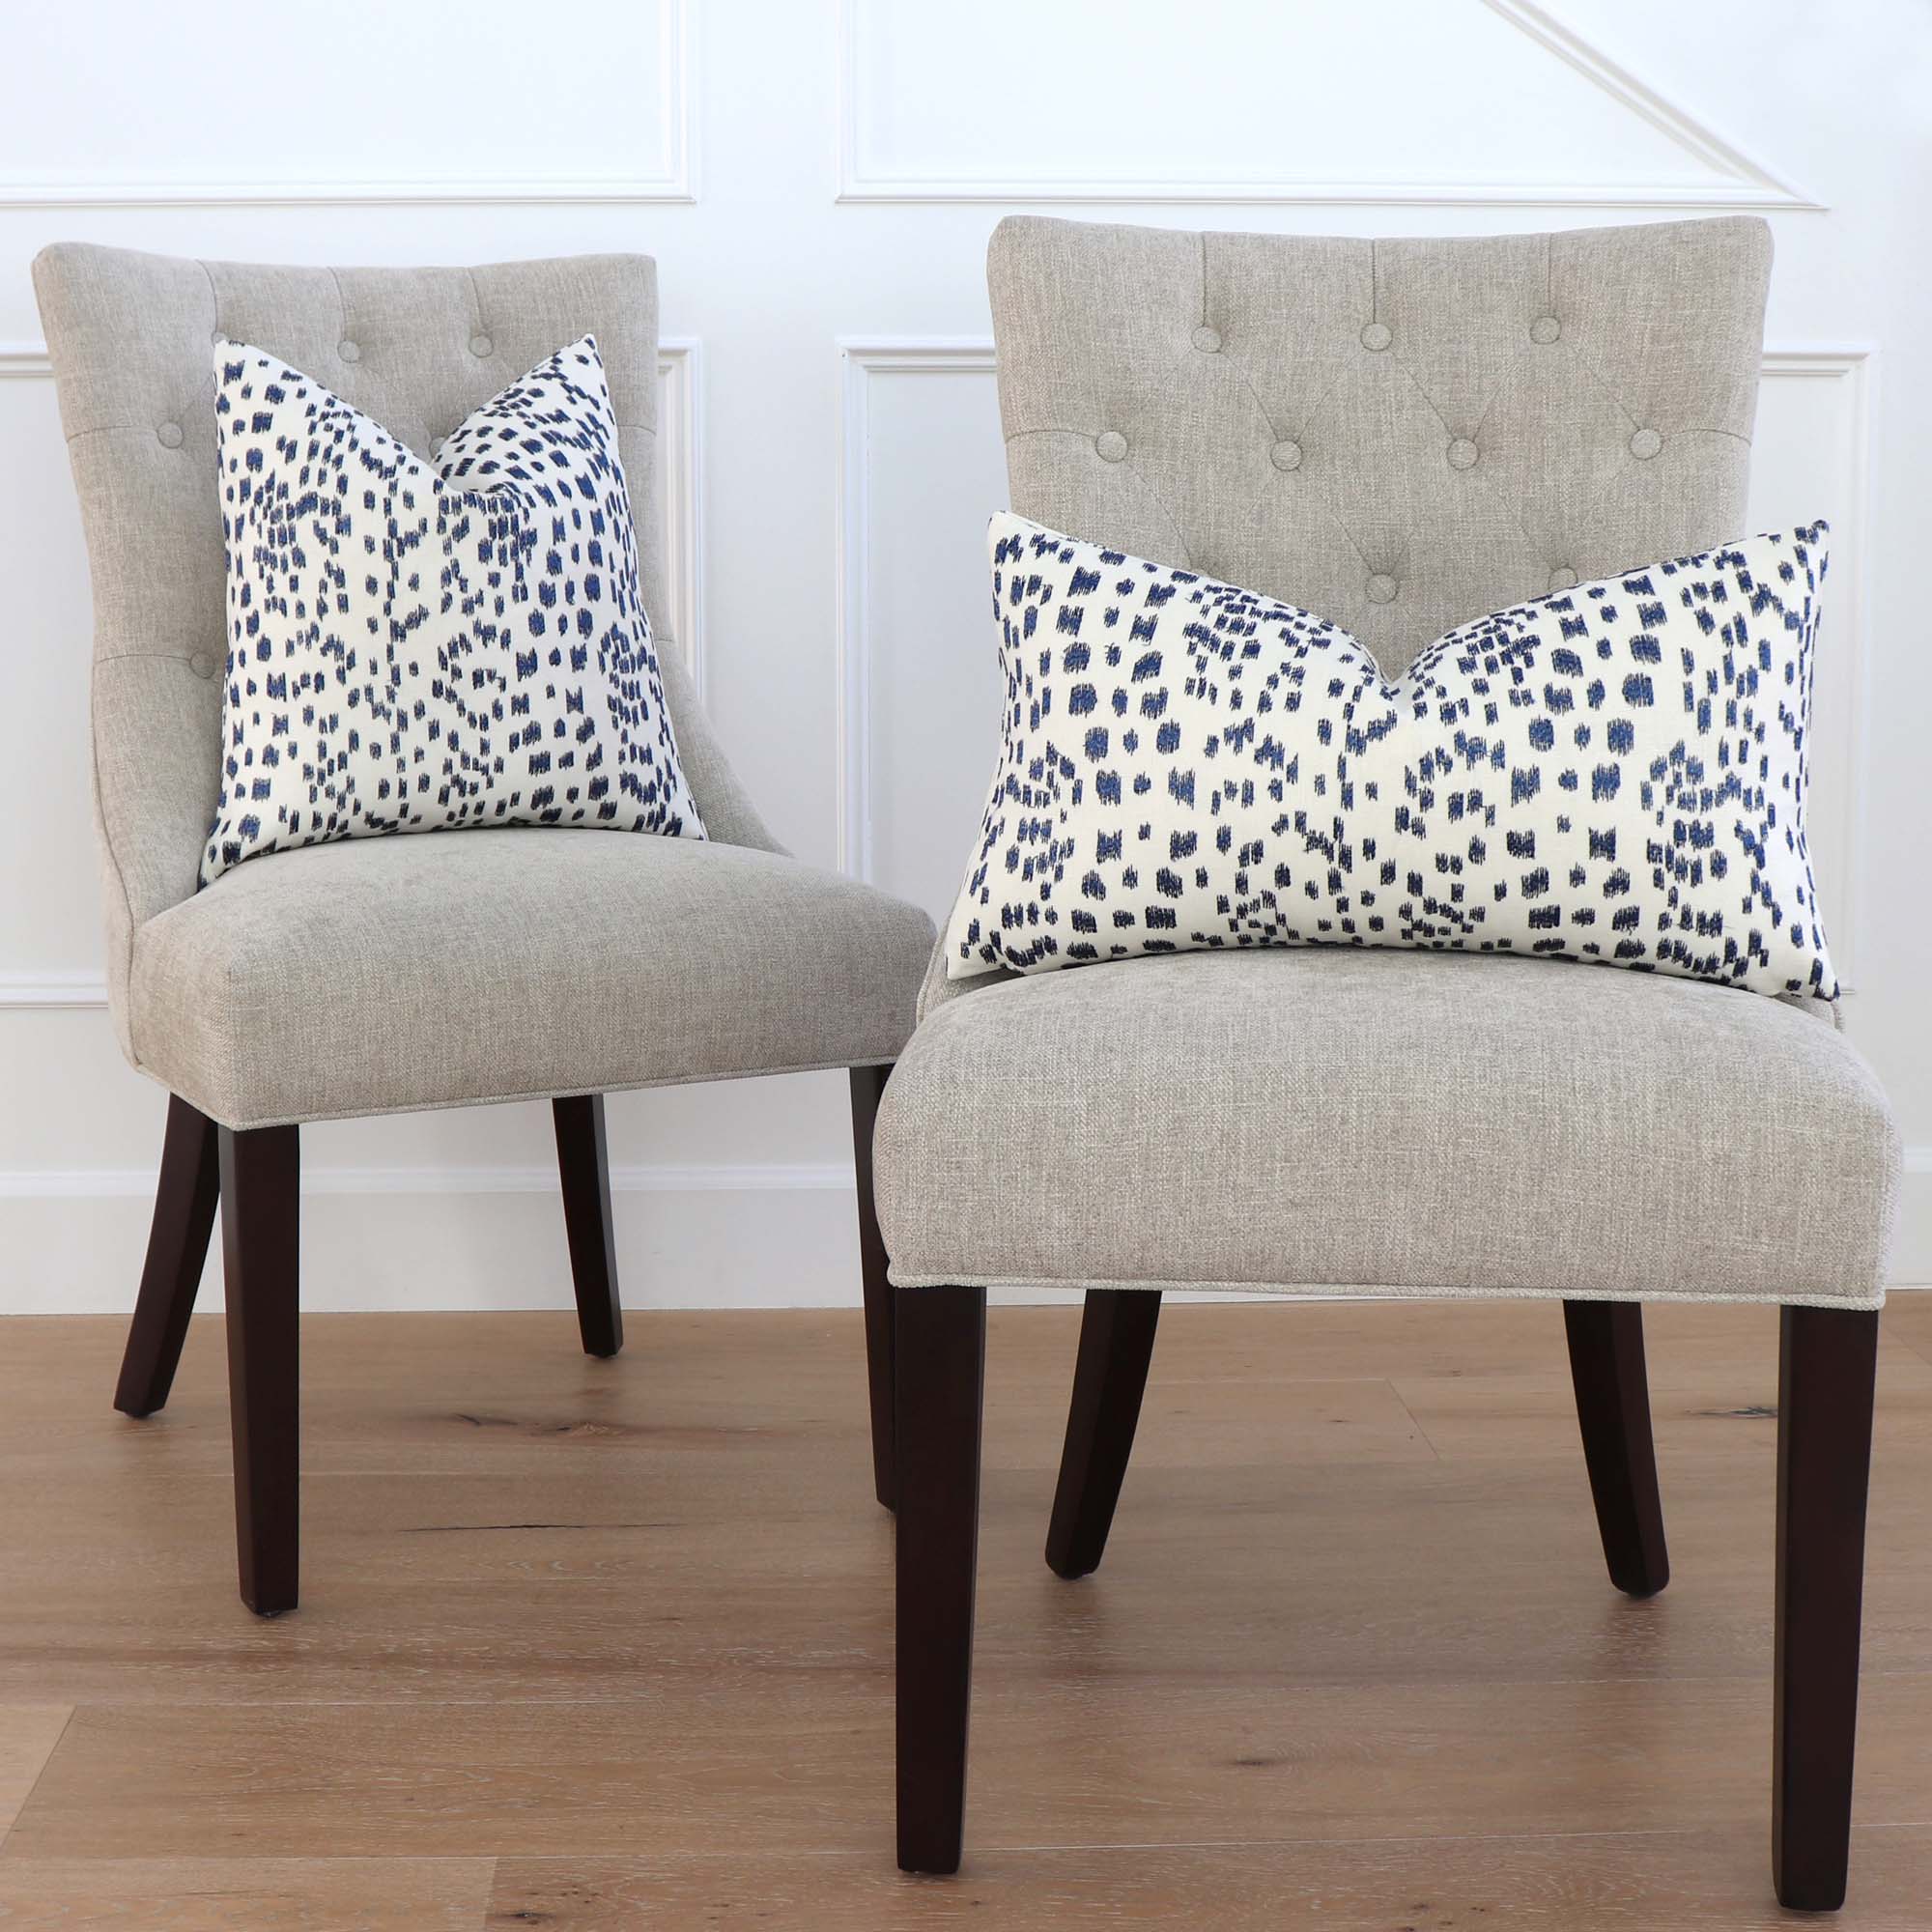 https://www.chloeandolive.com/cdn/shop/products/Brunschwig-Fils-Les-Touches-Embroidered-Indigo-Blue-8015168.50-Luxury-Designer-Throw-Pillow-Cover-on-Chairs-in-Home-Decor_5000x.jpg?v=1618165174